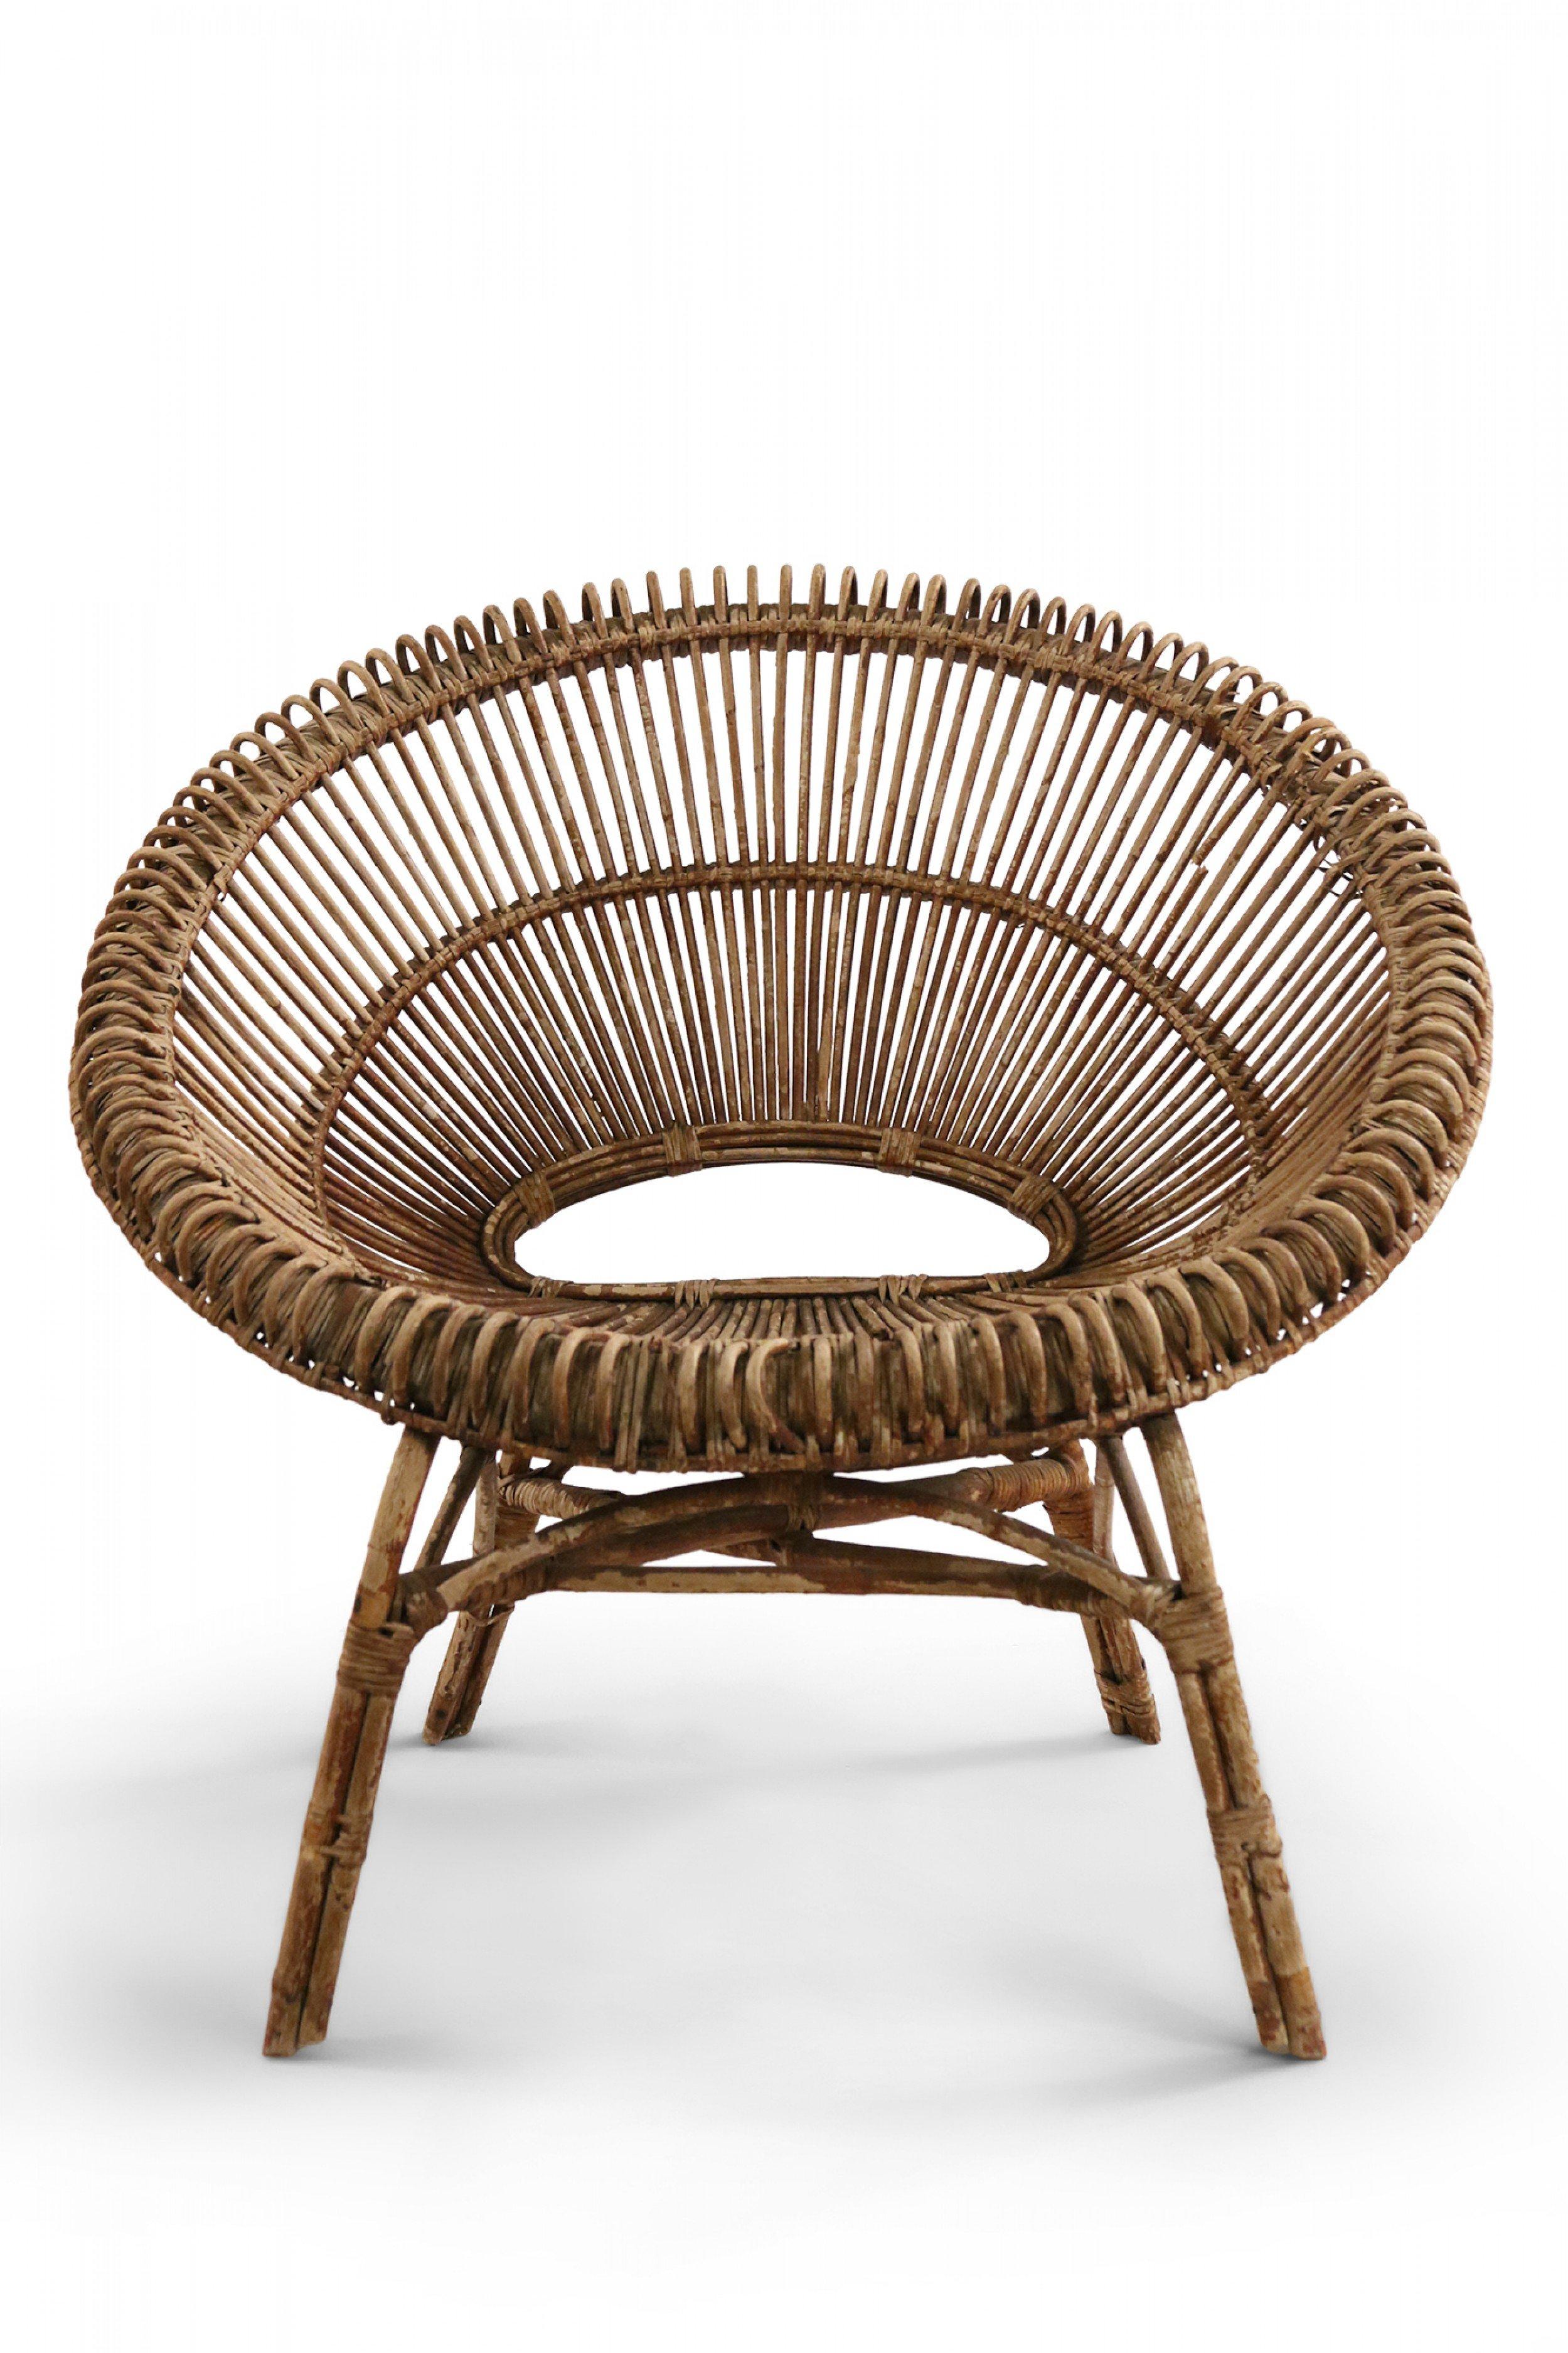 2 Mid-Century French Round Bamboo and Rattan Chairs For Sale 8